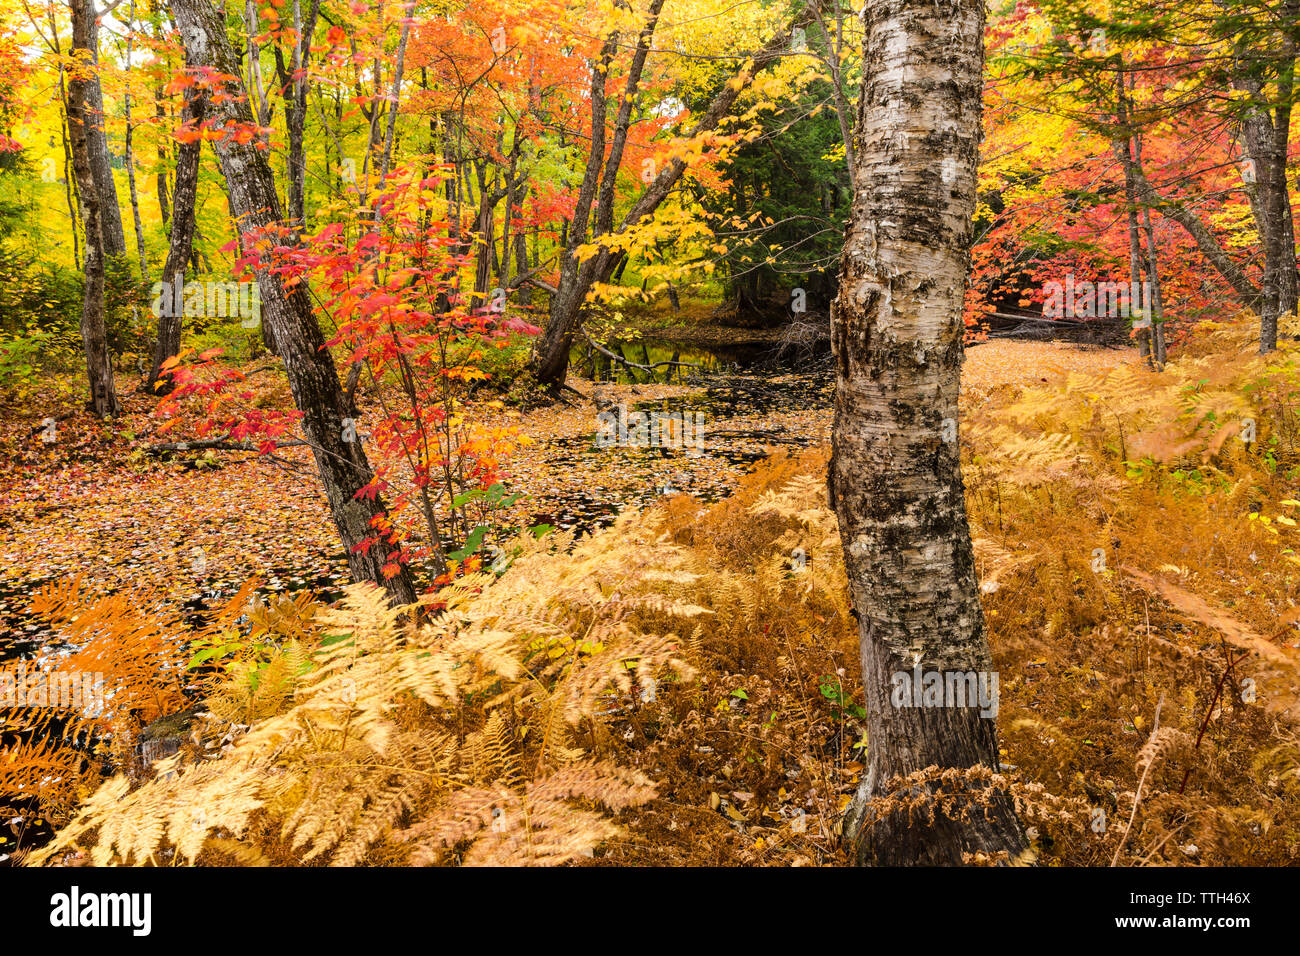 Fall foliage in Maine's Northern Forest. Stock Photo